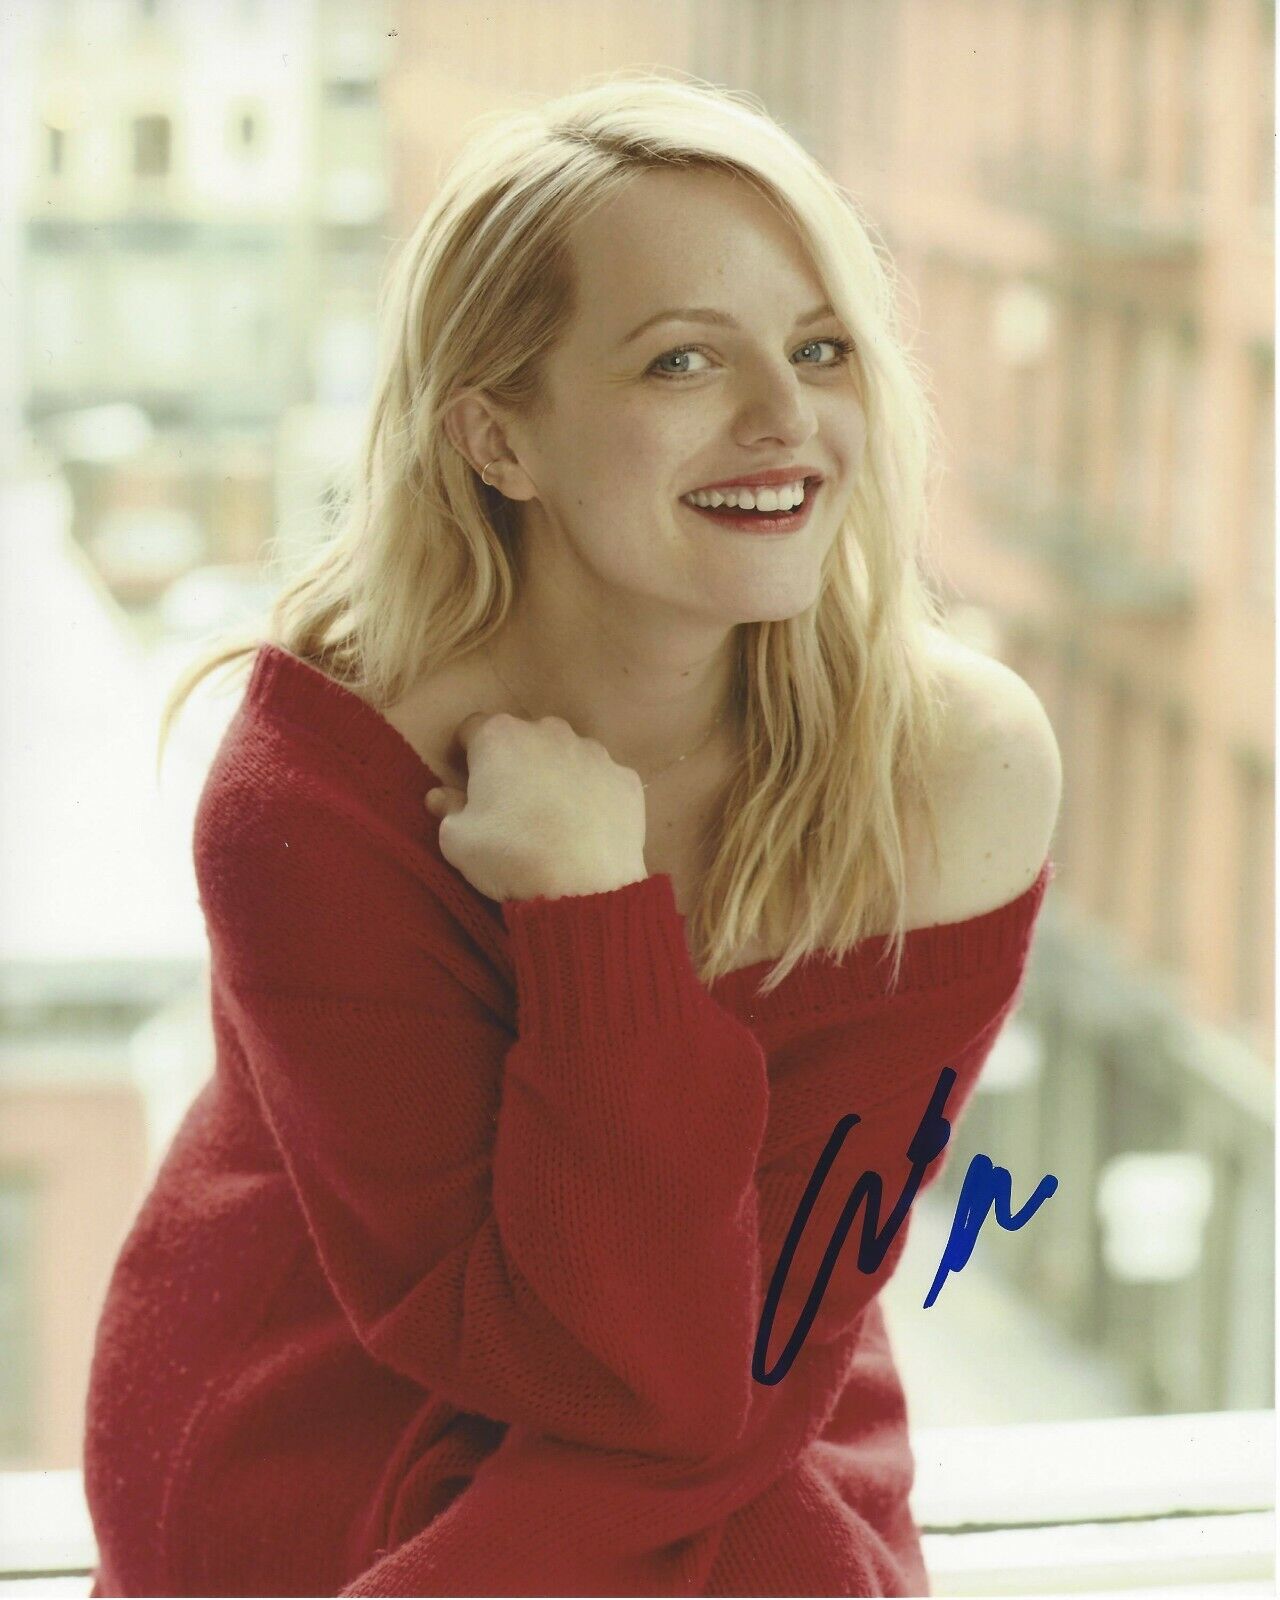 ACTRESS ELISABETH MOSS SIGNED 8x10 Photo Poster painting w/COA MAD MEN THE HANDMAID'S TALE